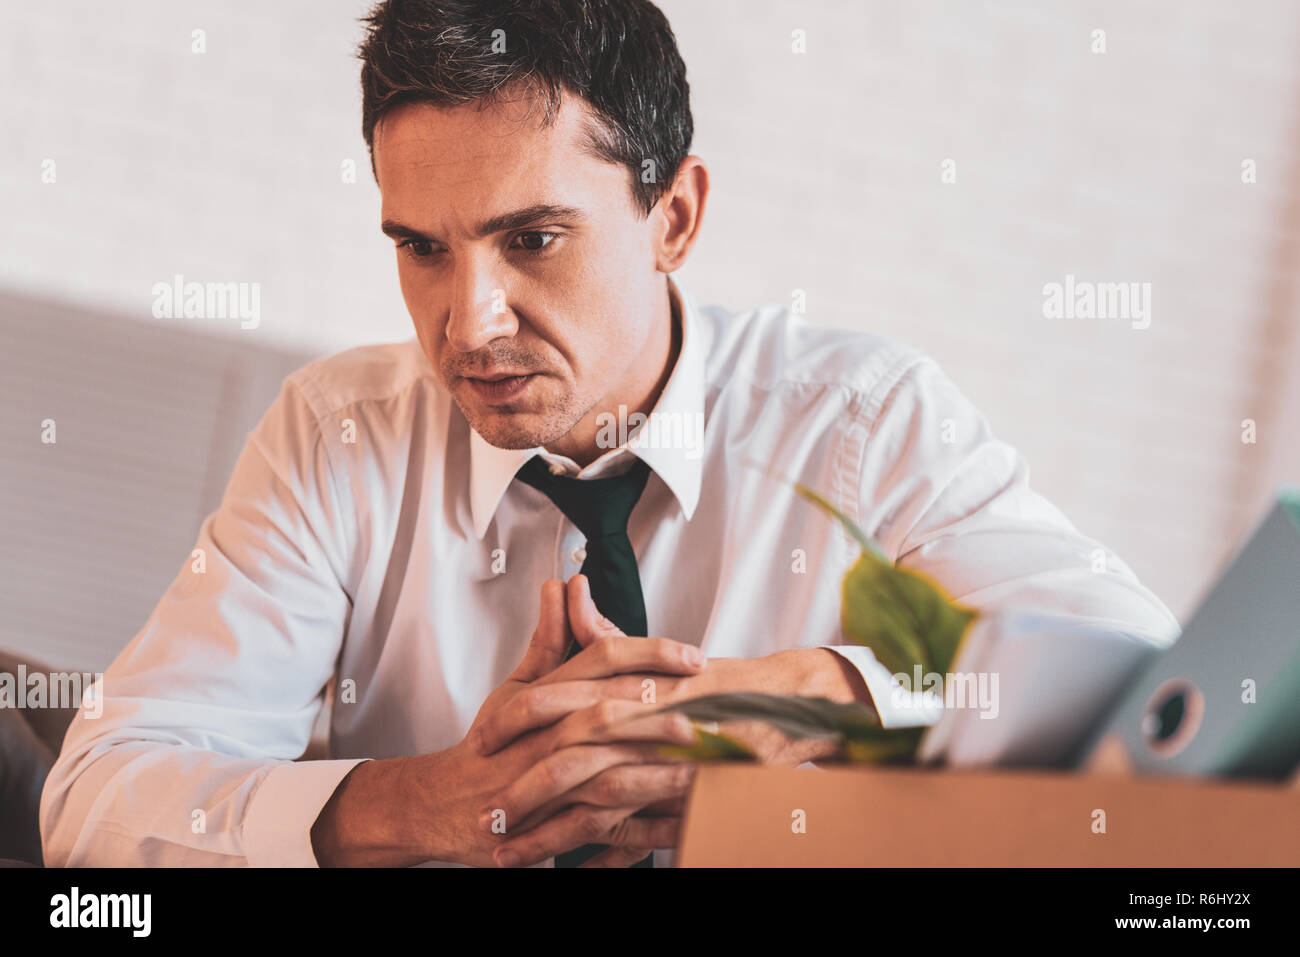 Jobless man frowning and feeling desperate Stock Photo